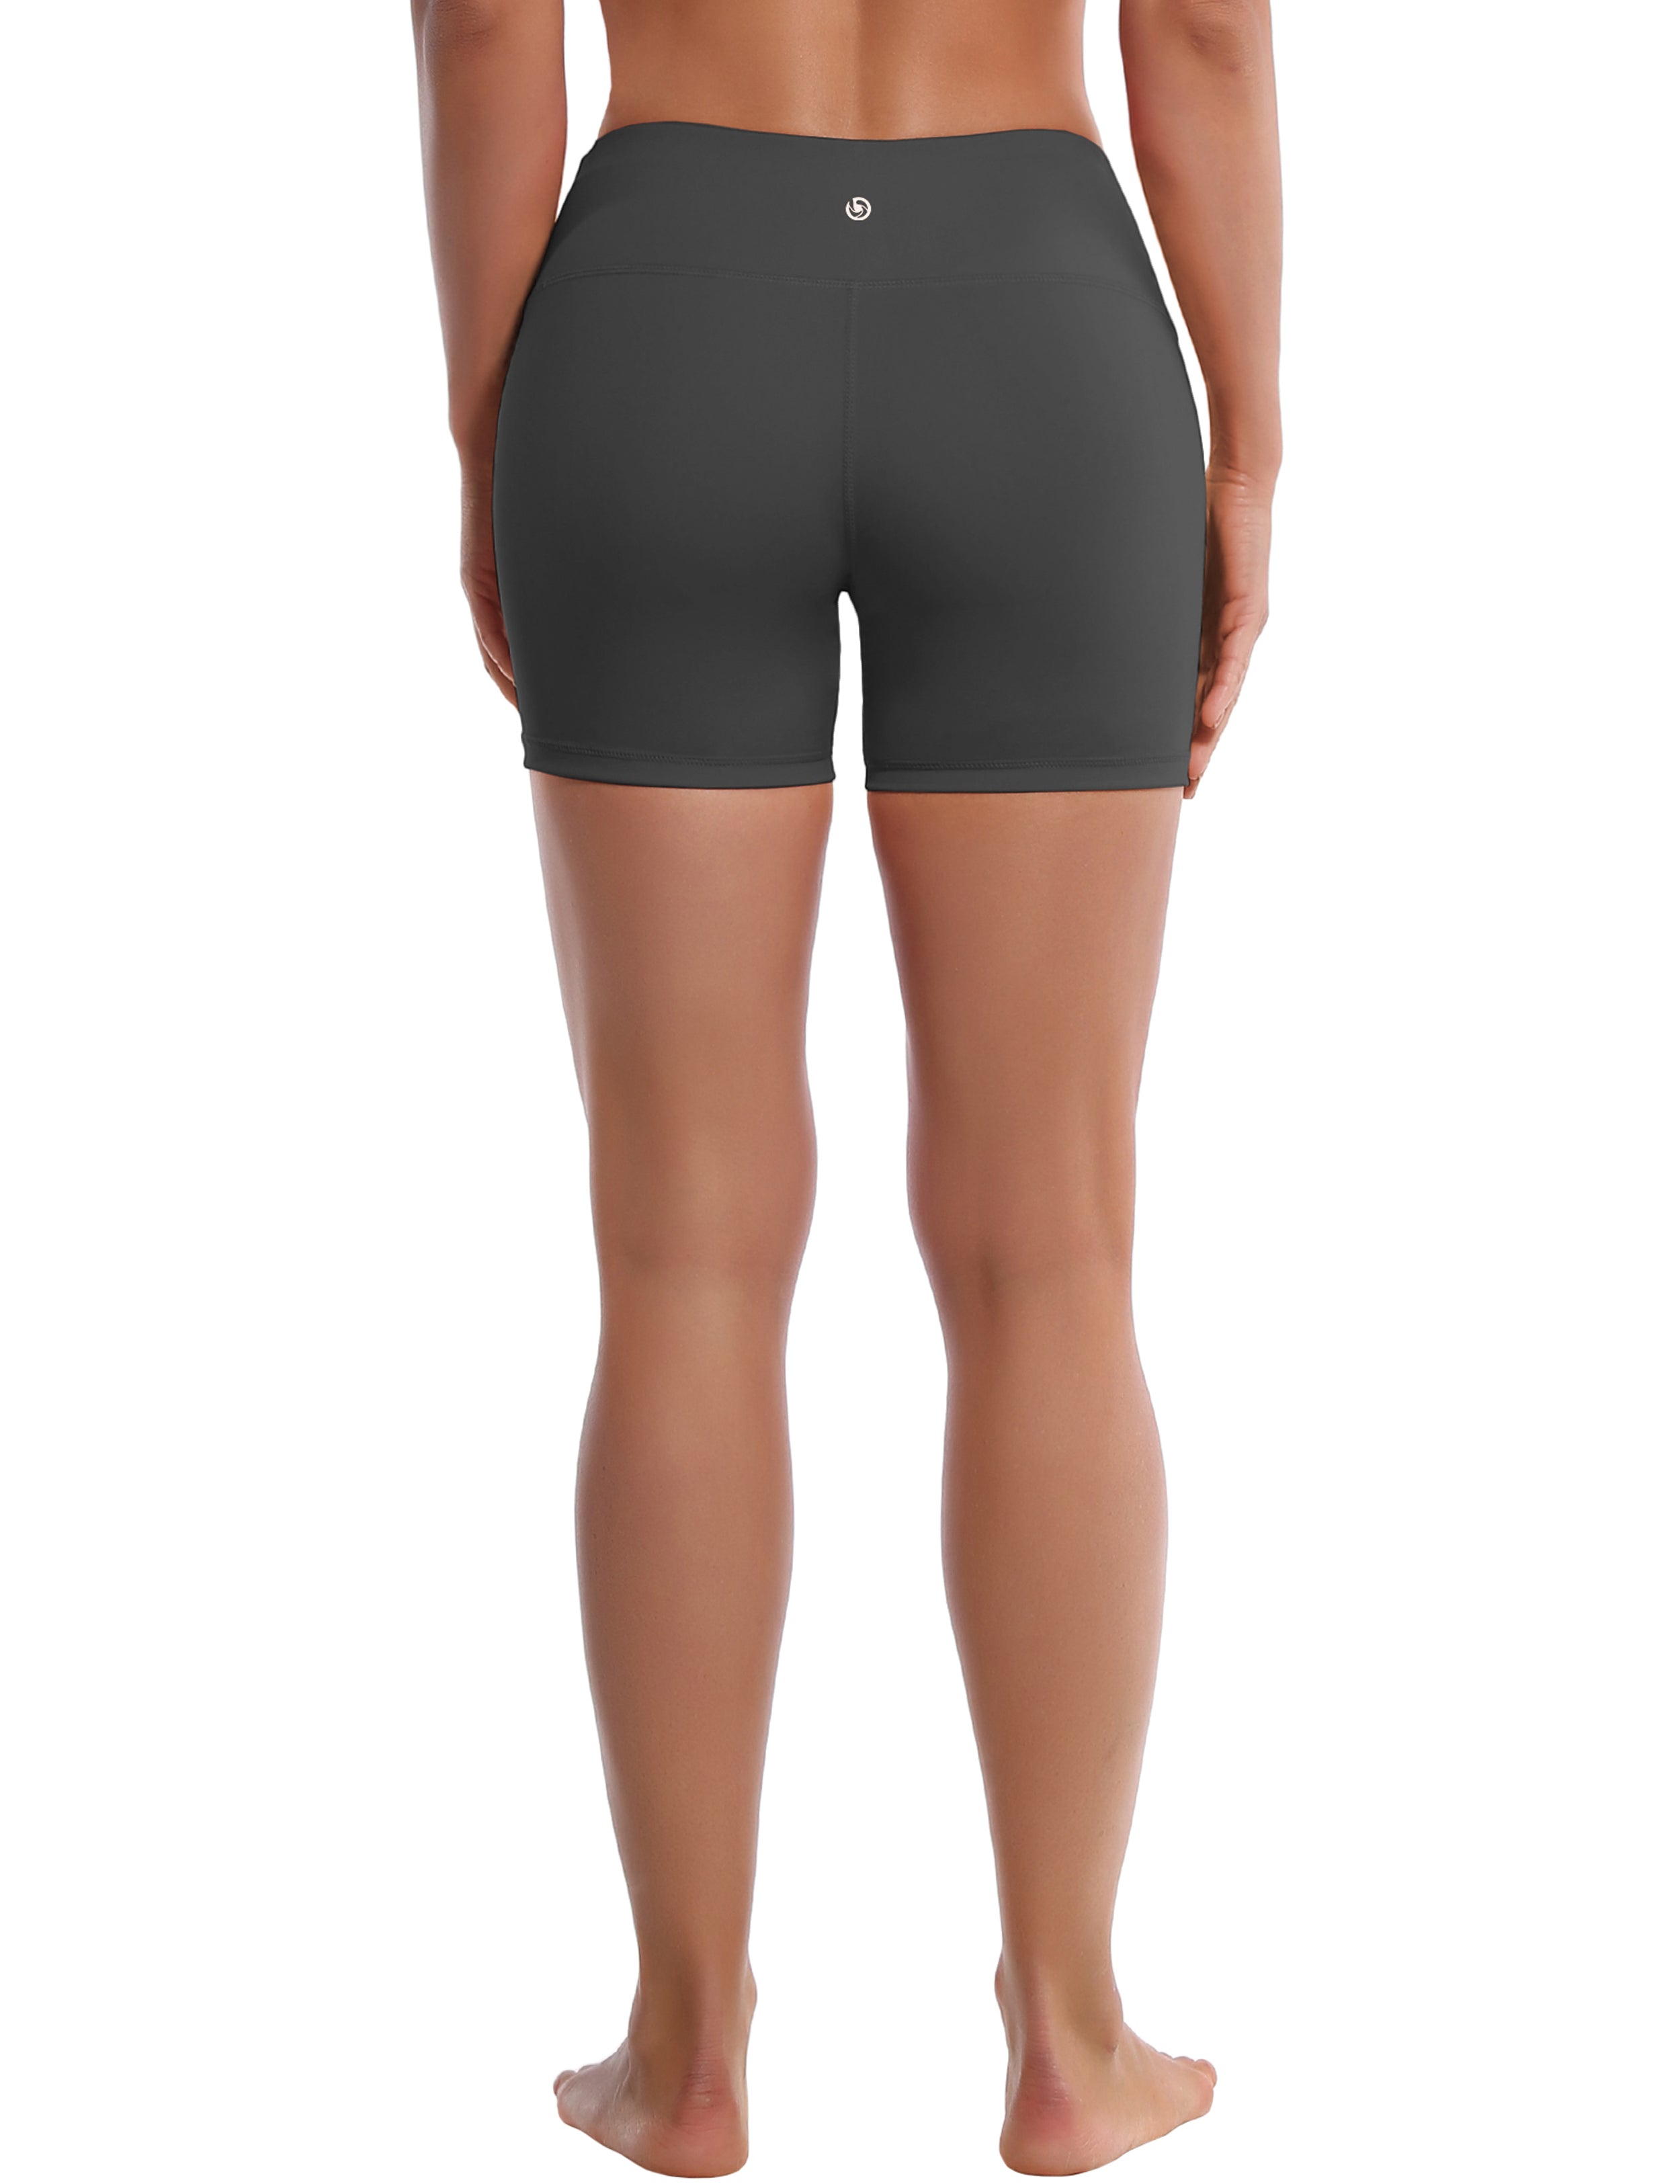 4" Biking Shorts shadowcharcoal Sleek, soft, smooth and totally comfortable: our newest style is here. Softest-ever fabric High elasticity High density 4-way stretch Fabric doesn't attract lint easily No see-through Moisture-wicking Machine wash 75% Nylon, 25% Spandex